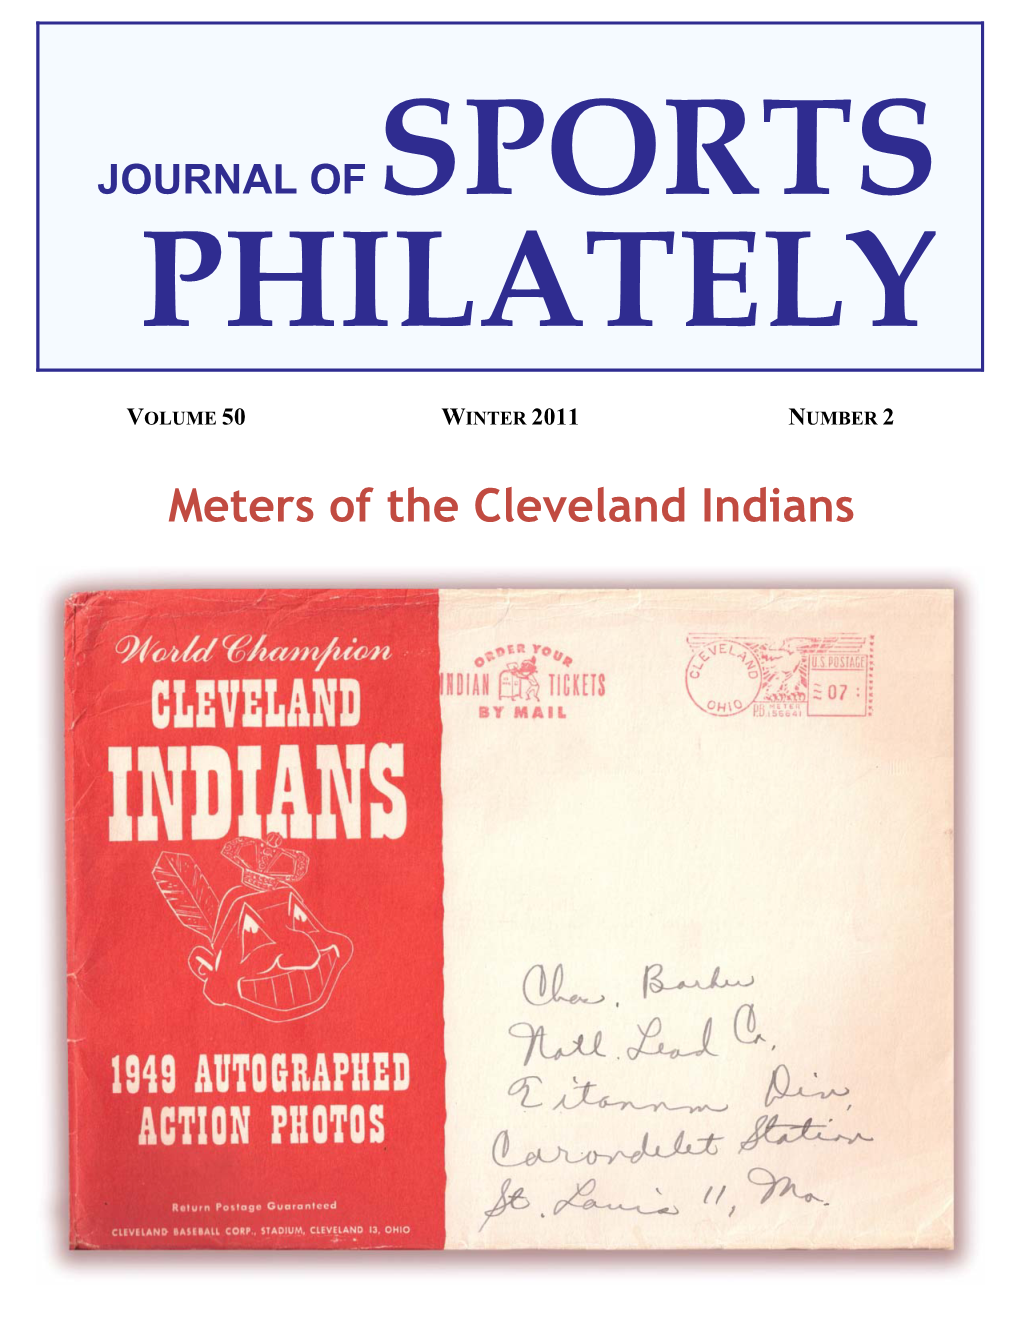 Meters of the Cleveland Indians TABLE of CONTENTS